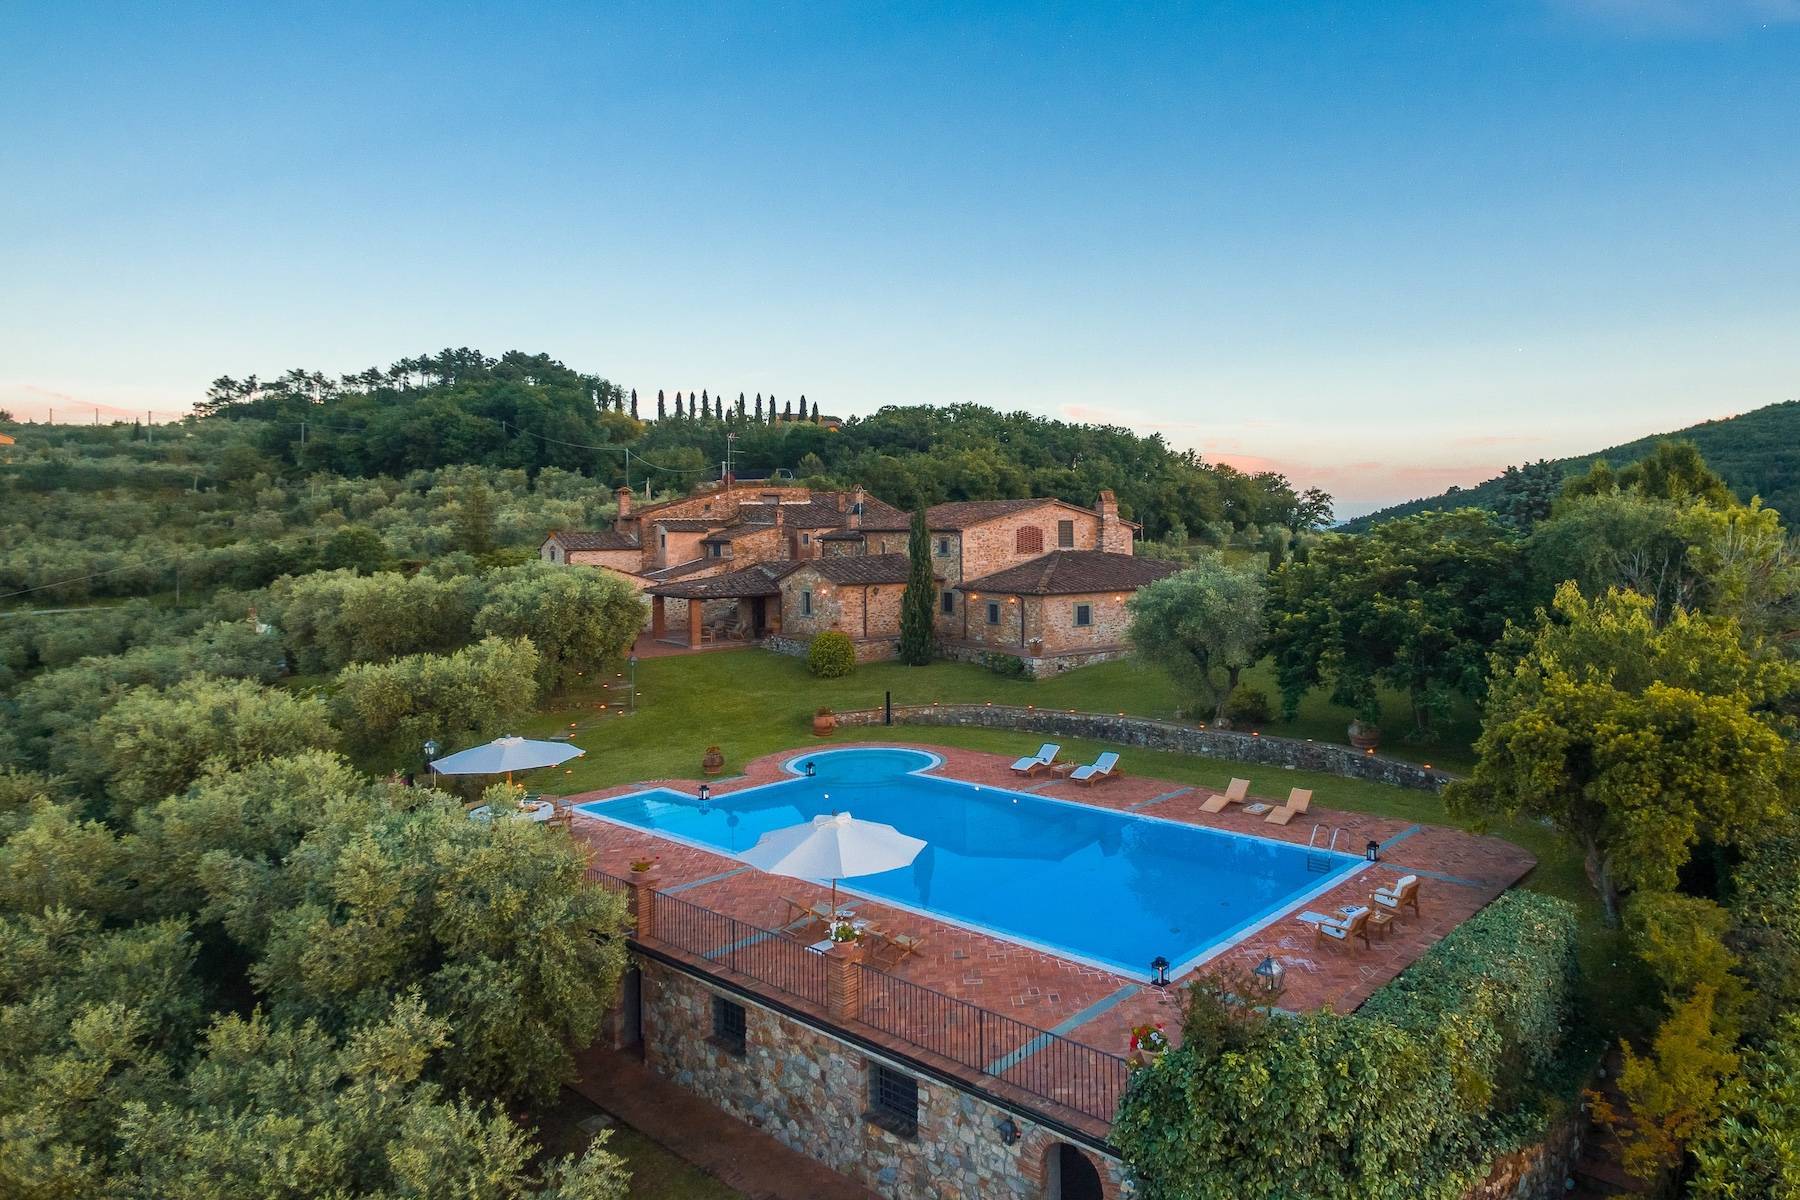 Exclusive Villas on the Tuscan hills